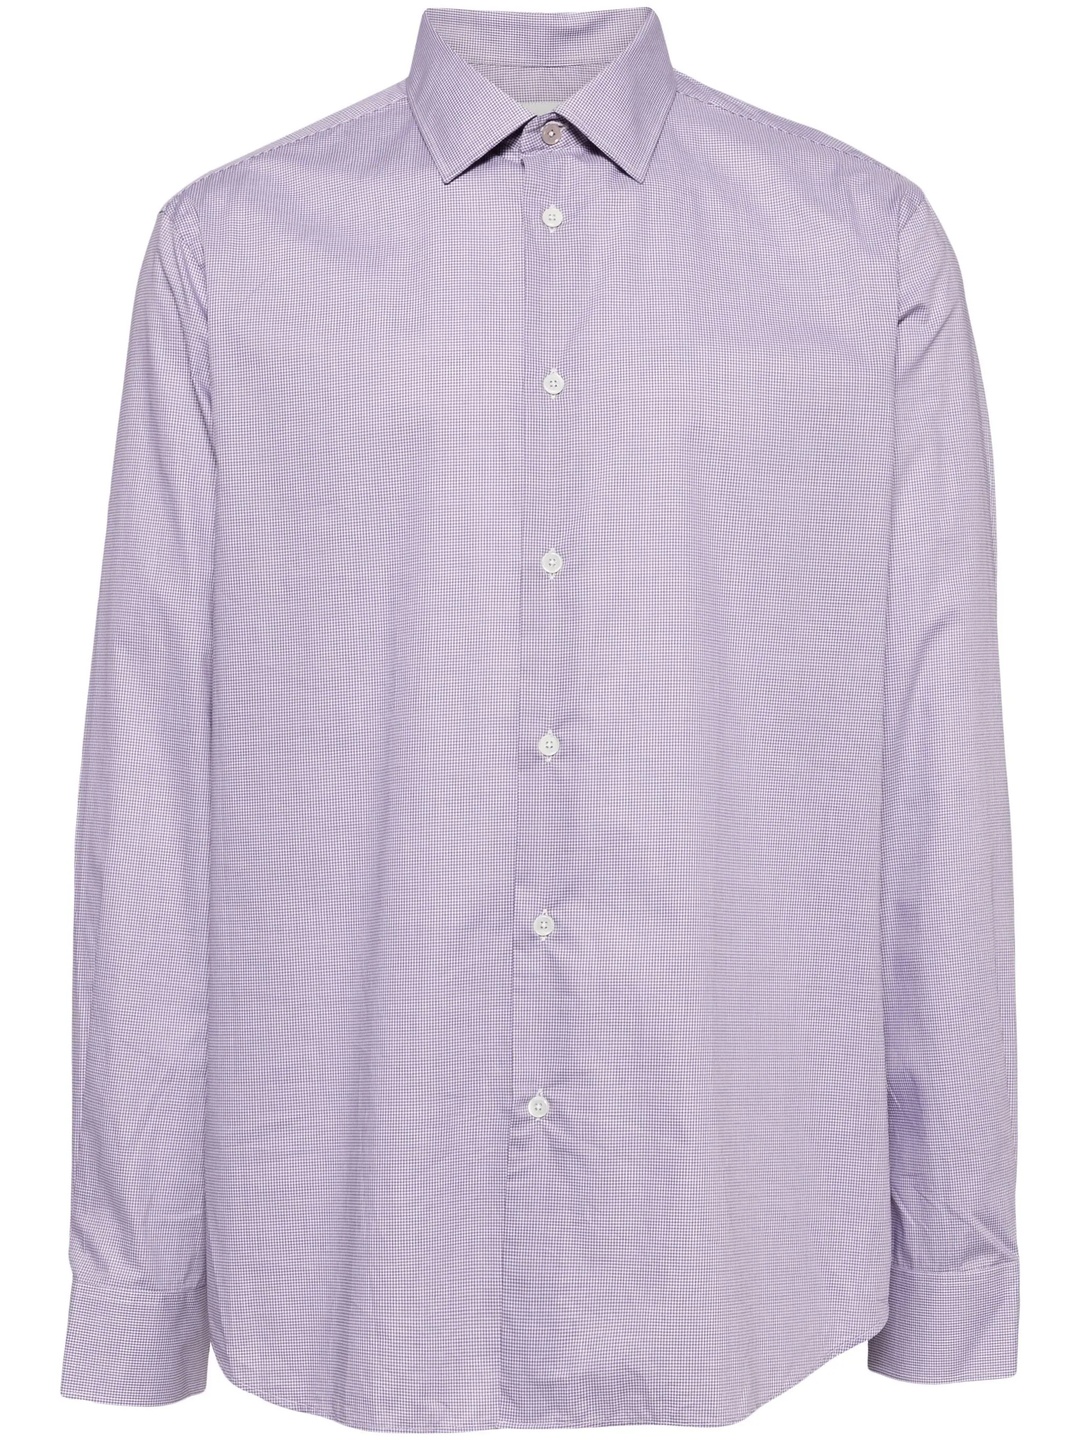 Mens Tailored Fit Shirt - 1